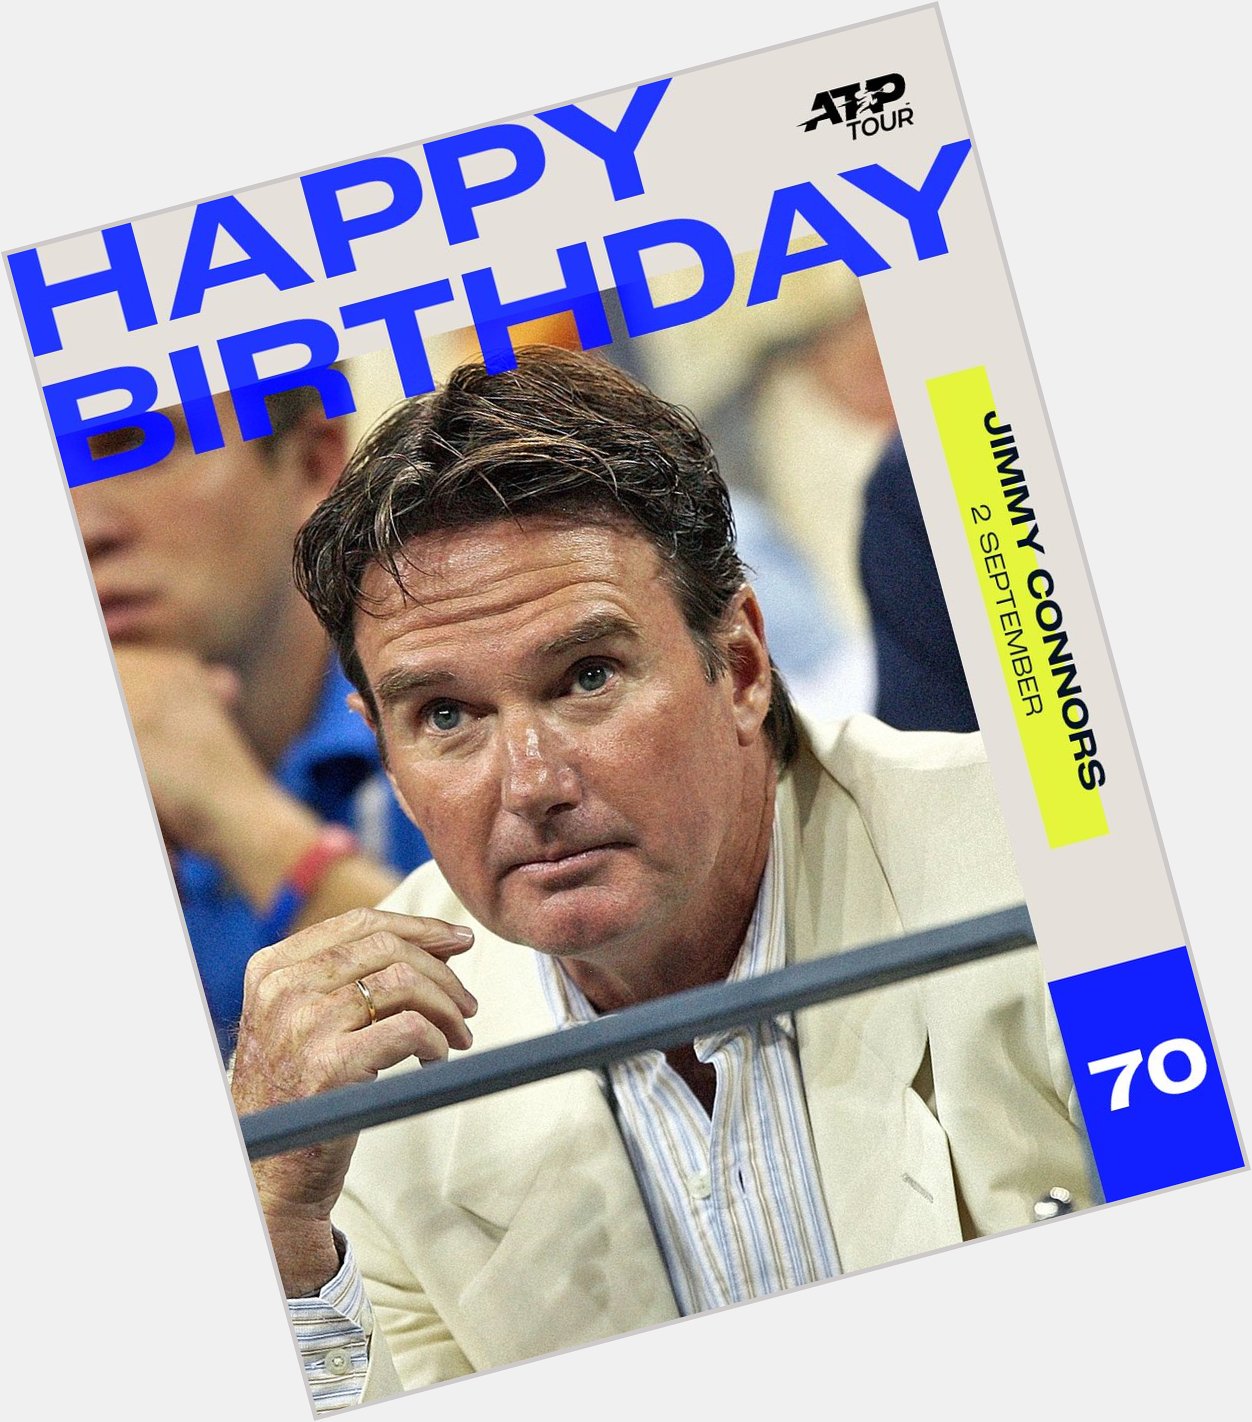 Wishing the former World No.1 and 8x Grand Slam champion, Jimmy Connors, a Happy Birthday! 